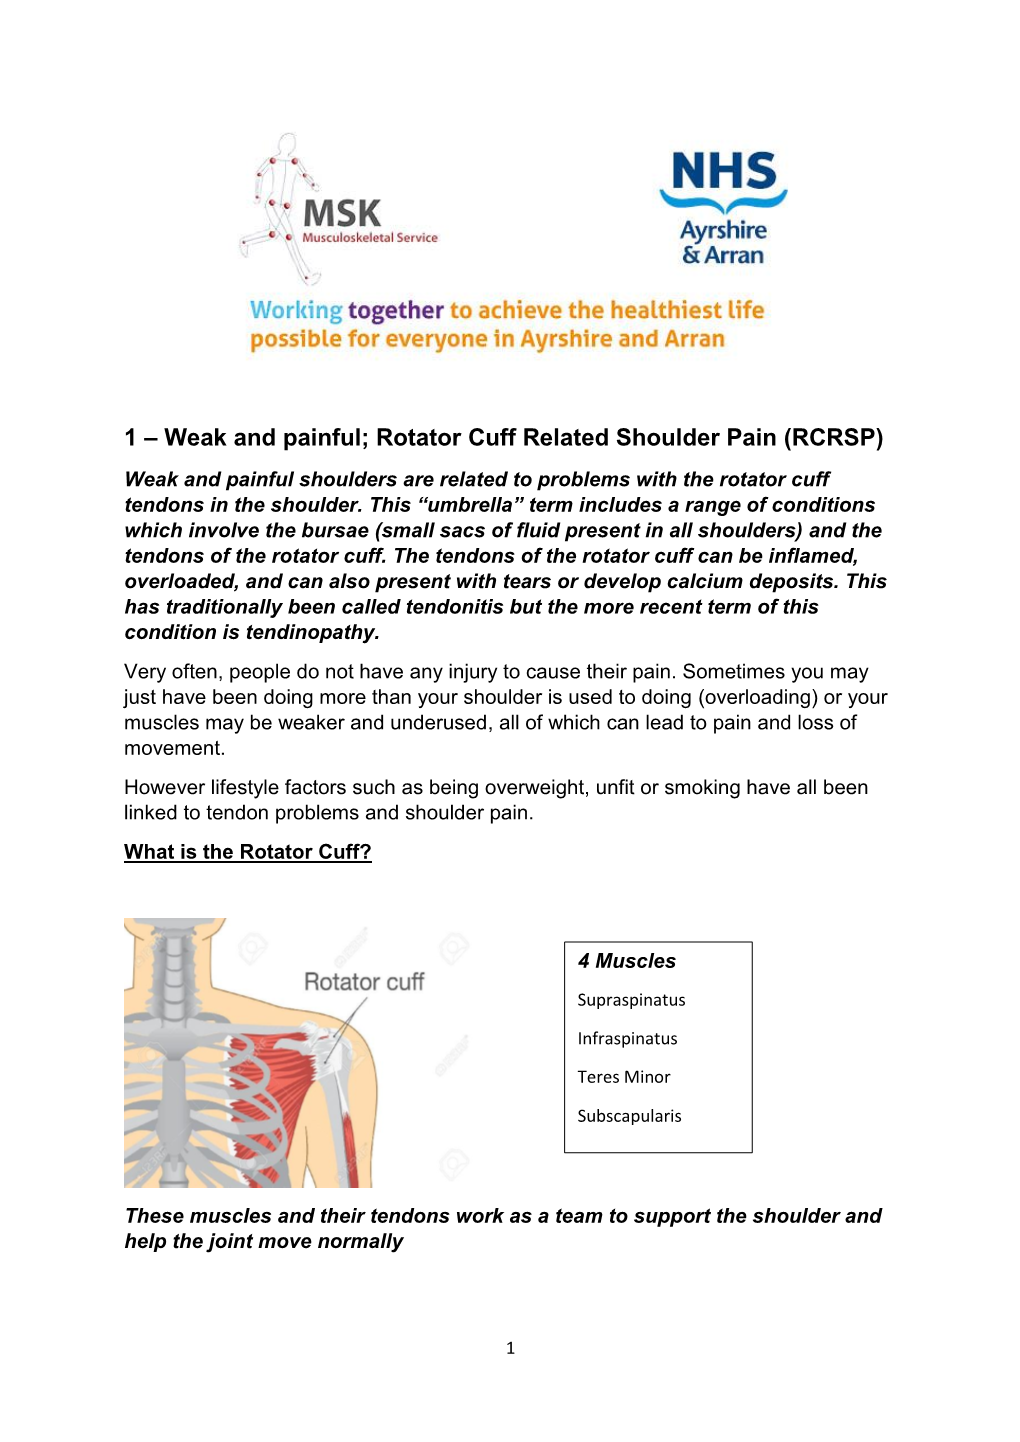 1 – Weak and Painful; Rotator Cuff Related Shoulder Pain (RCRSP) Weak and Painful Shoulders Are Related to Problems with the Rotator Cuff Tendons in the Shoulder